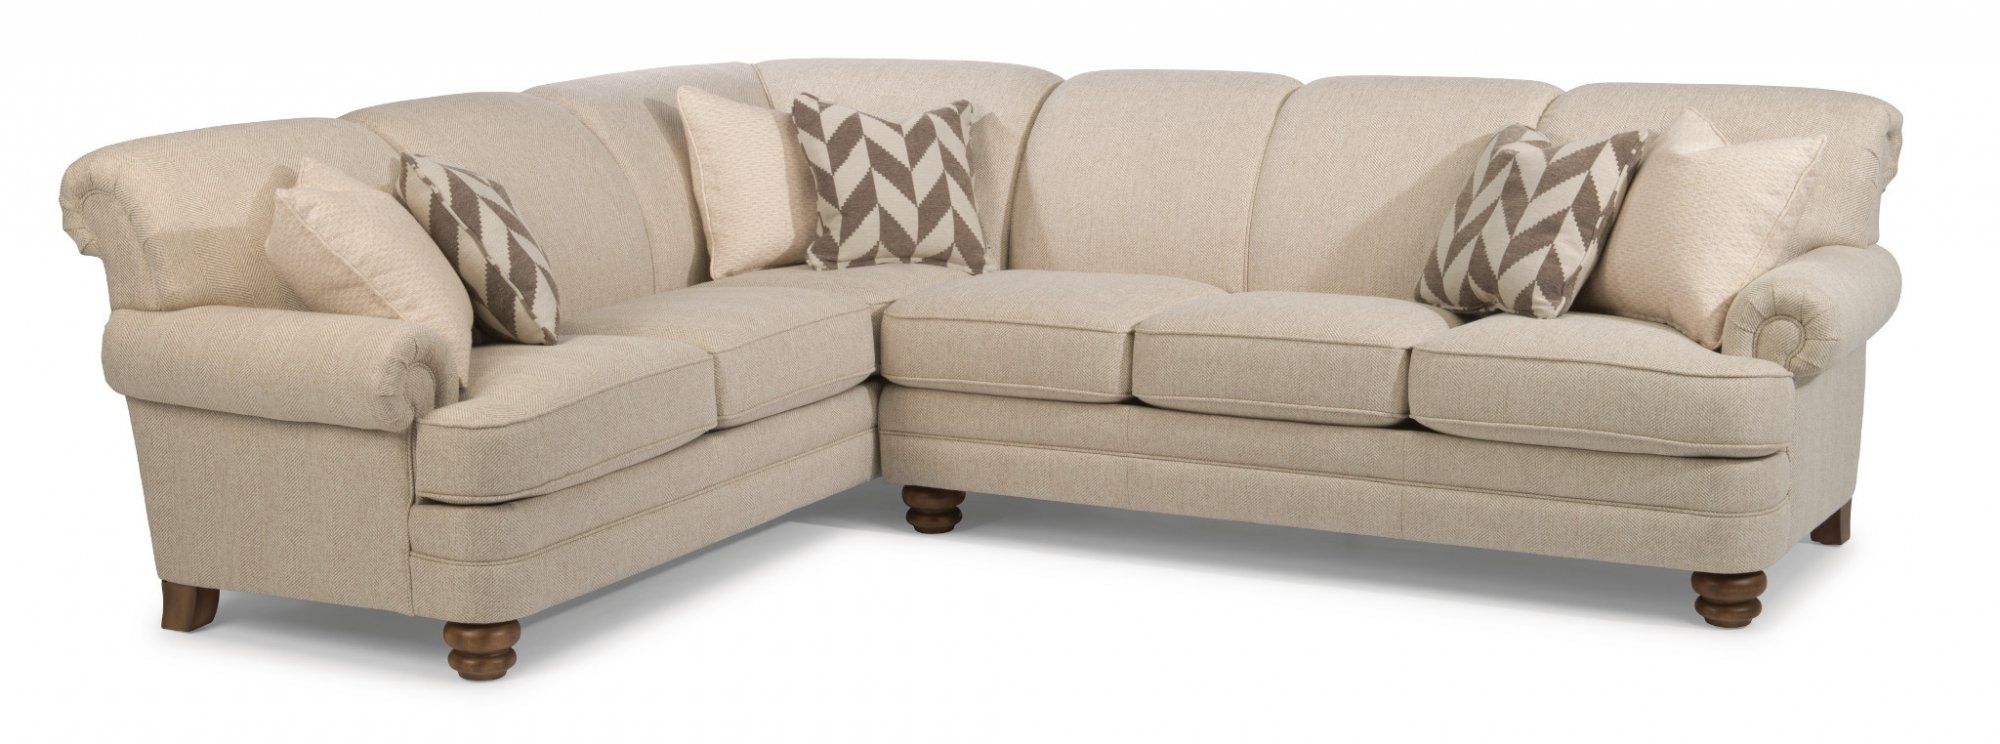 Best Sectional Sofa With Nailhead Trim 89 For Your Best Sleeper Sofa Throughout Sectional Sofas With Nailhead Trim (View 8 of 10)